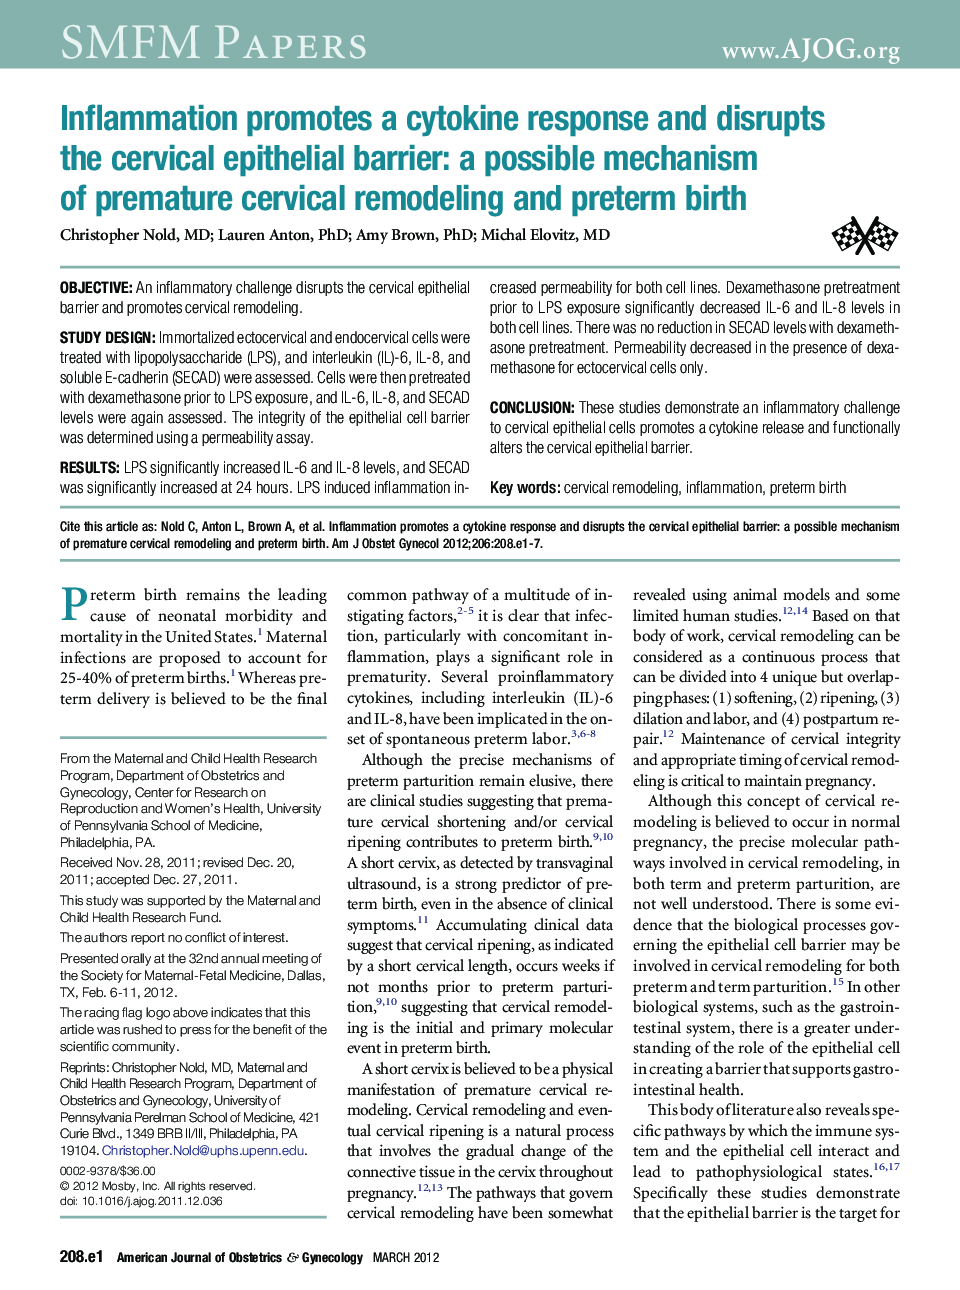 Inflammation promotes a cytokine response and disrupts the cervical epithelial barrier: a possible mechanism of premature cervical remodeling and preterm birth